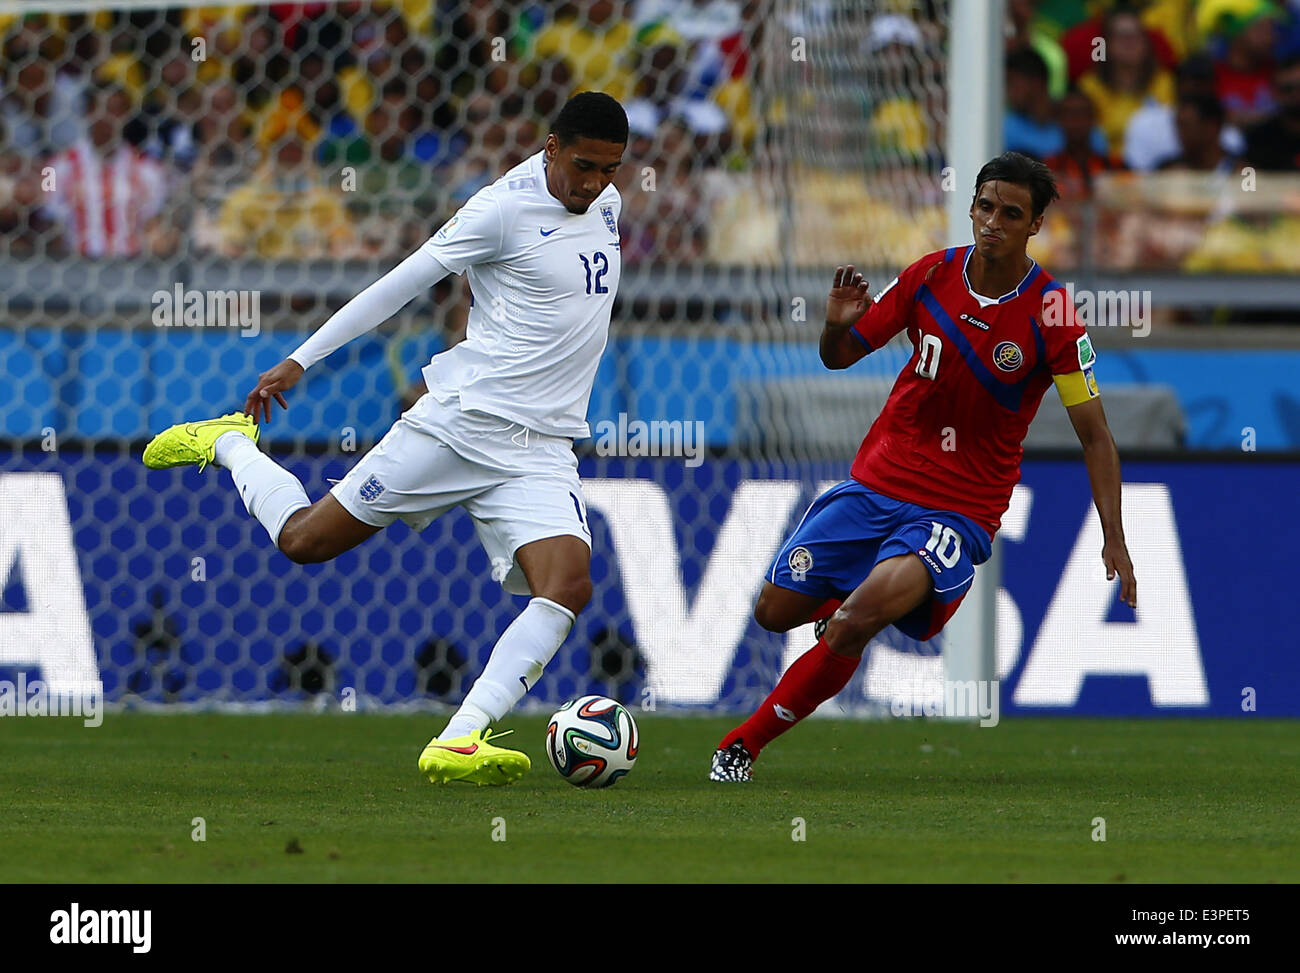 Belo Horizonte, Brazil. 24th June, 2014. England's Chris Smalling (L) vies with Costa Rica's Bryan Ruiz during a Group D match between Costa Rica and England of 2014 FIFA World Cup at the Estadio Mineirao Stadium in Belo Horizonte, Brazil, on June 24, 2014. England drew 0-0 with Costa Rica on Tuesday. © Liu Bin/Xinhua/Alamy Live News Stock Photo